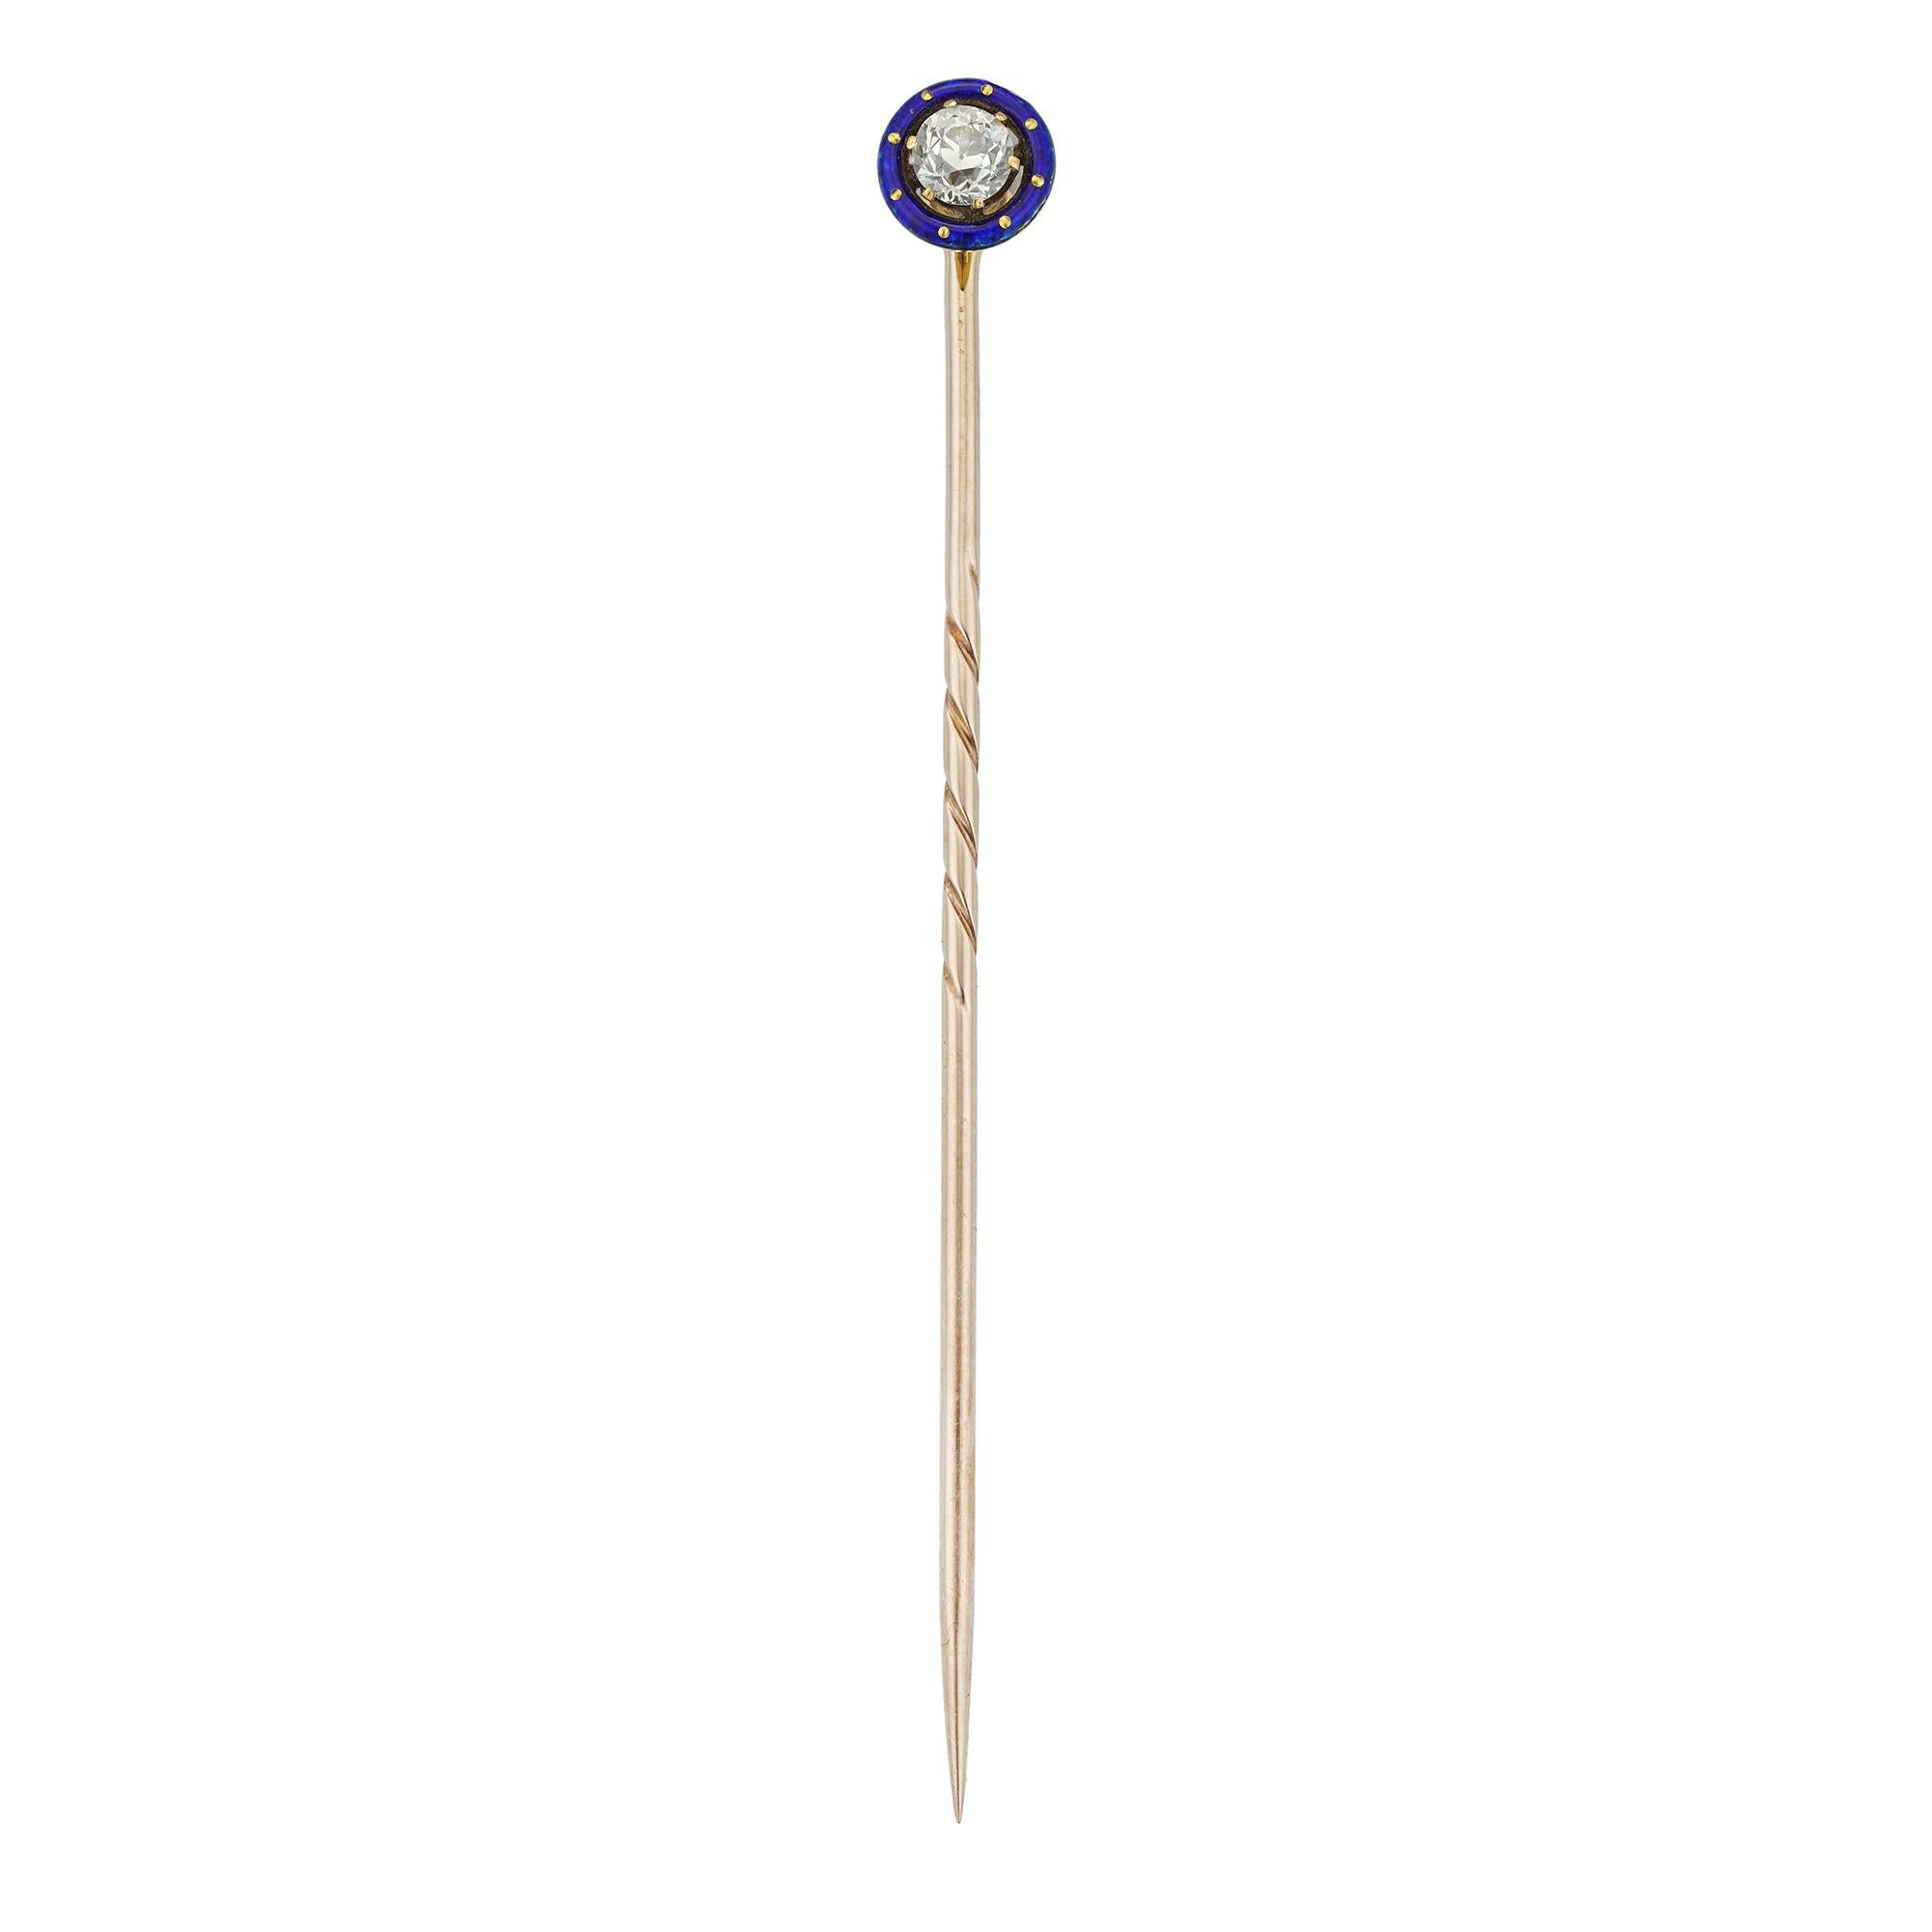 A late Victorian diamond and blue enamel stick pin, the old-cut diamond estimated to weigh 1/3 of a carat, six-claw set surrounded by blue enamelled frame with daylight in-between, mounted in yellow gold, with rose gold pin fitting, circa 1890,